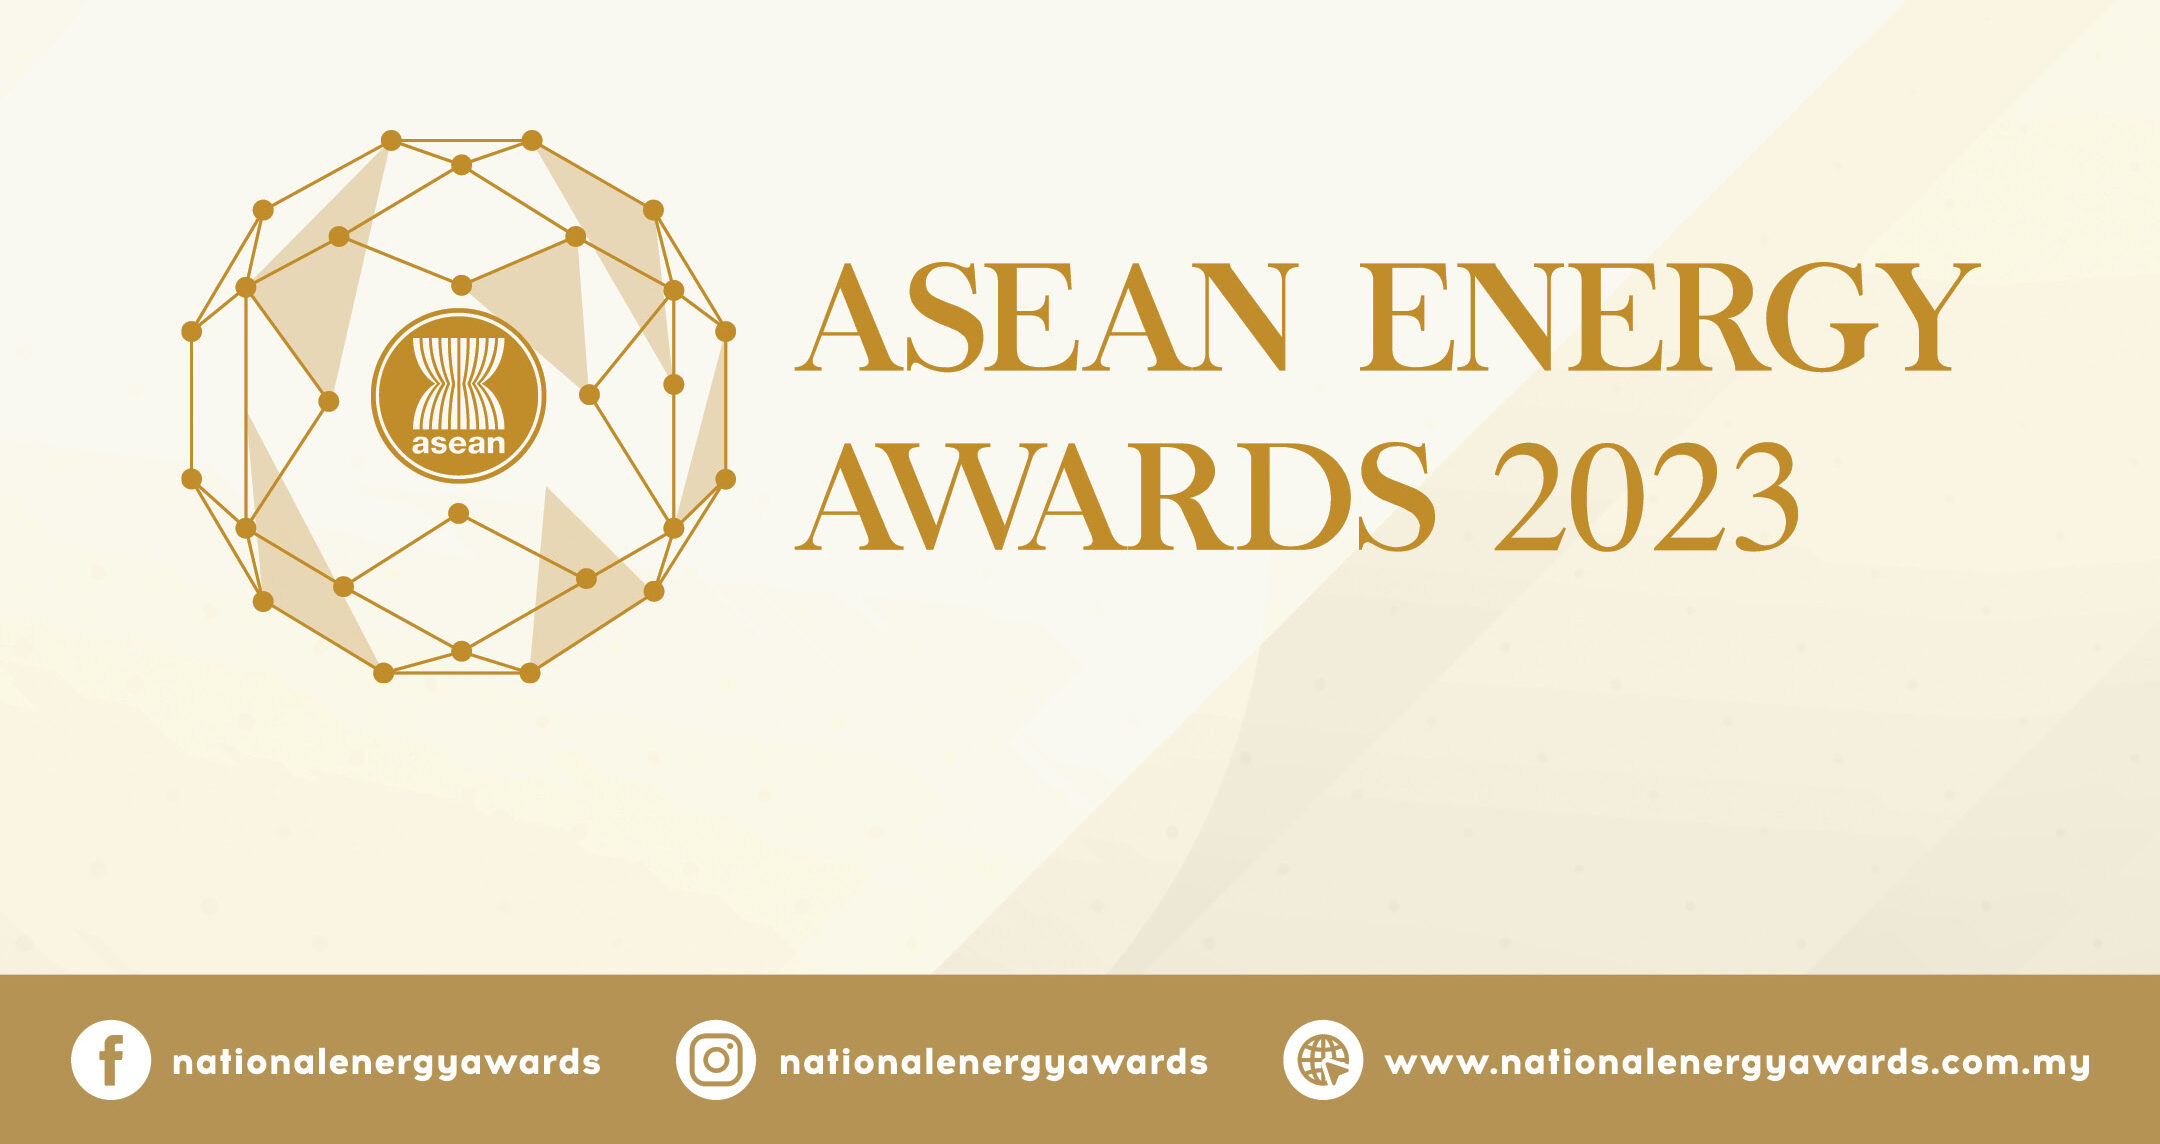 12 MALAYSIA SUSTAINABLE ENERGY PROJECTS WIN THE ASEAN ENERGY AWARDS